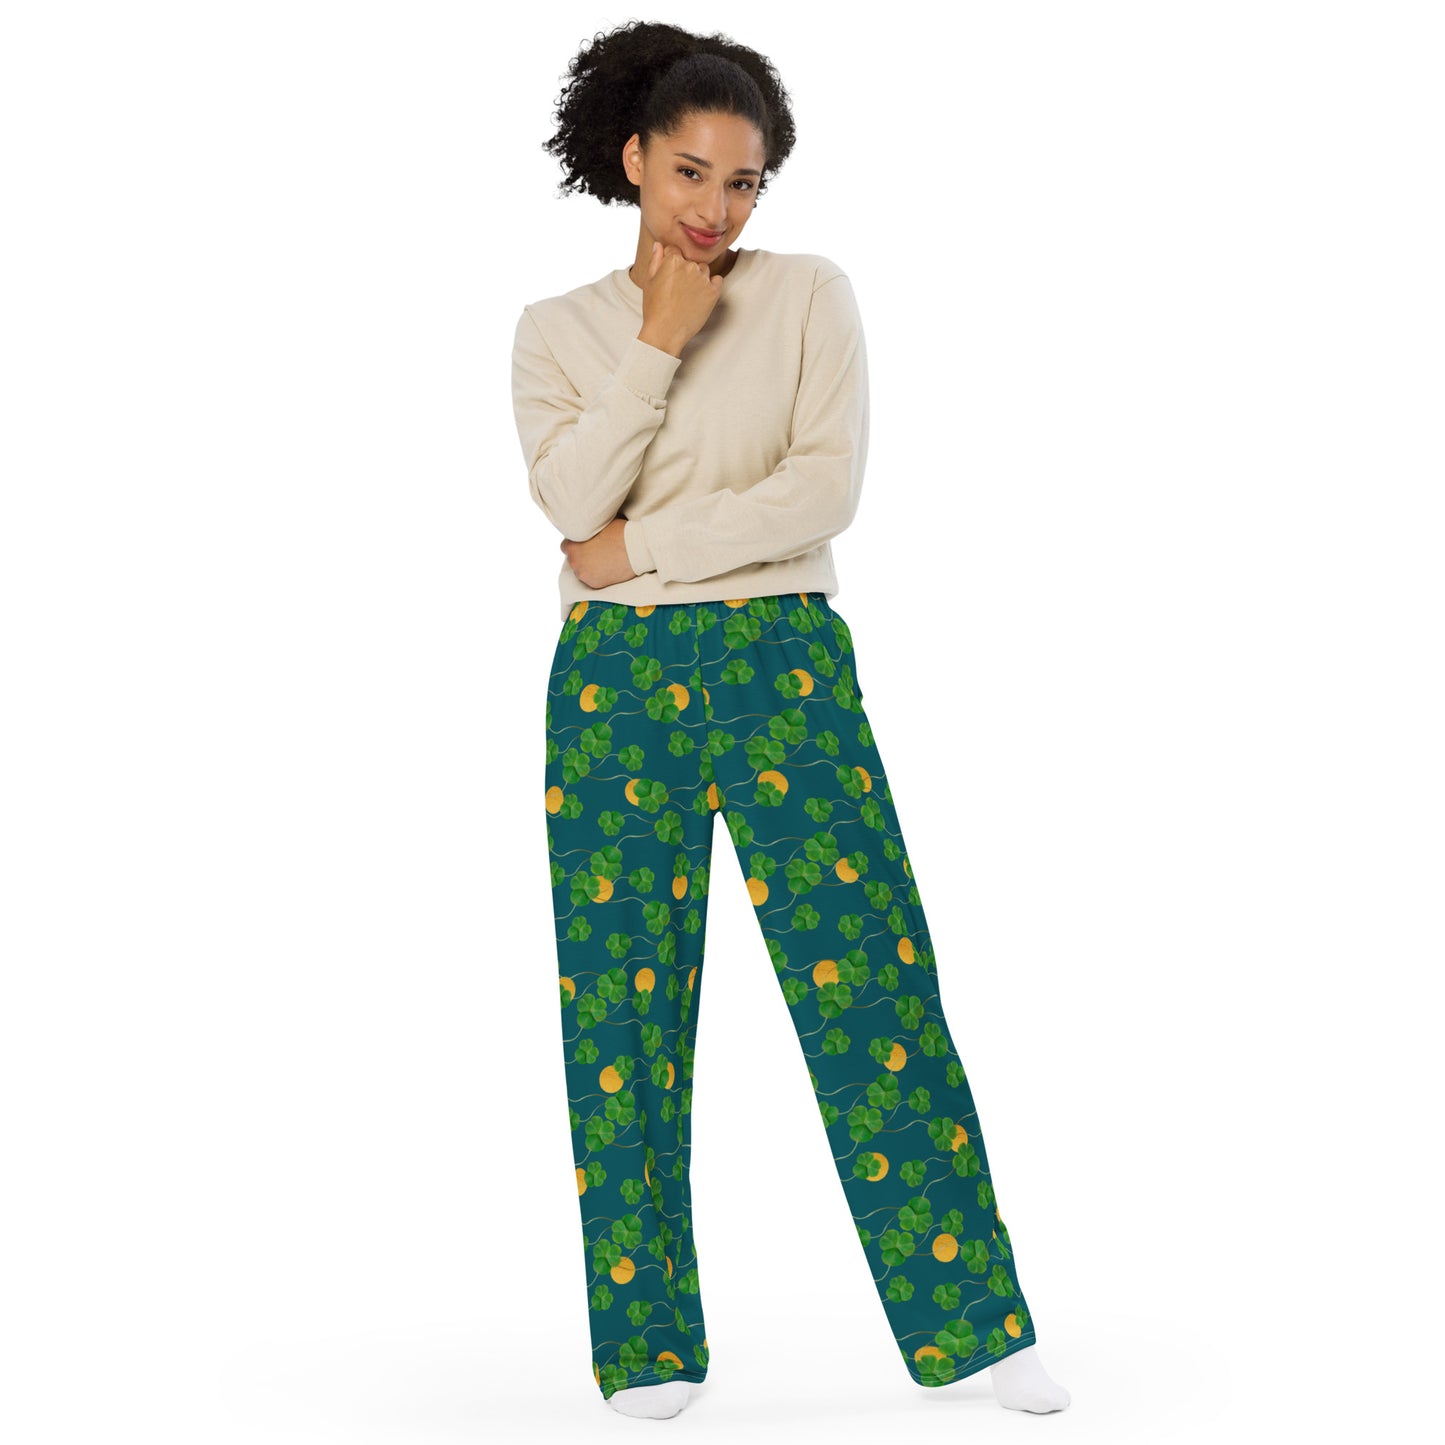 Unisex wide leg pants with side pockets, elastic waistband and drawstring.  Design features pattern of three-leaf clover and lucky gold coins on a blue-green background. Shown on female model.